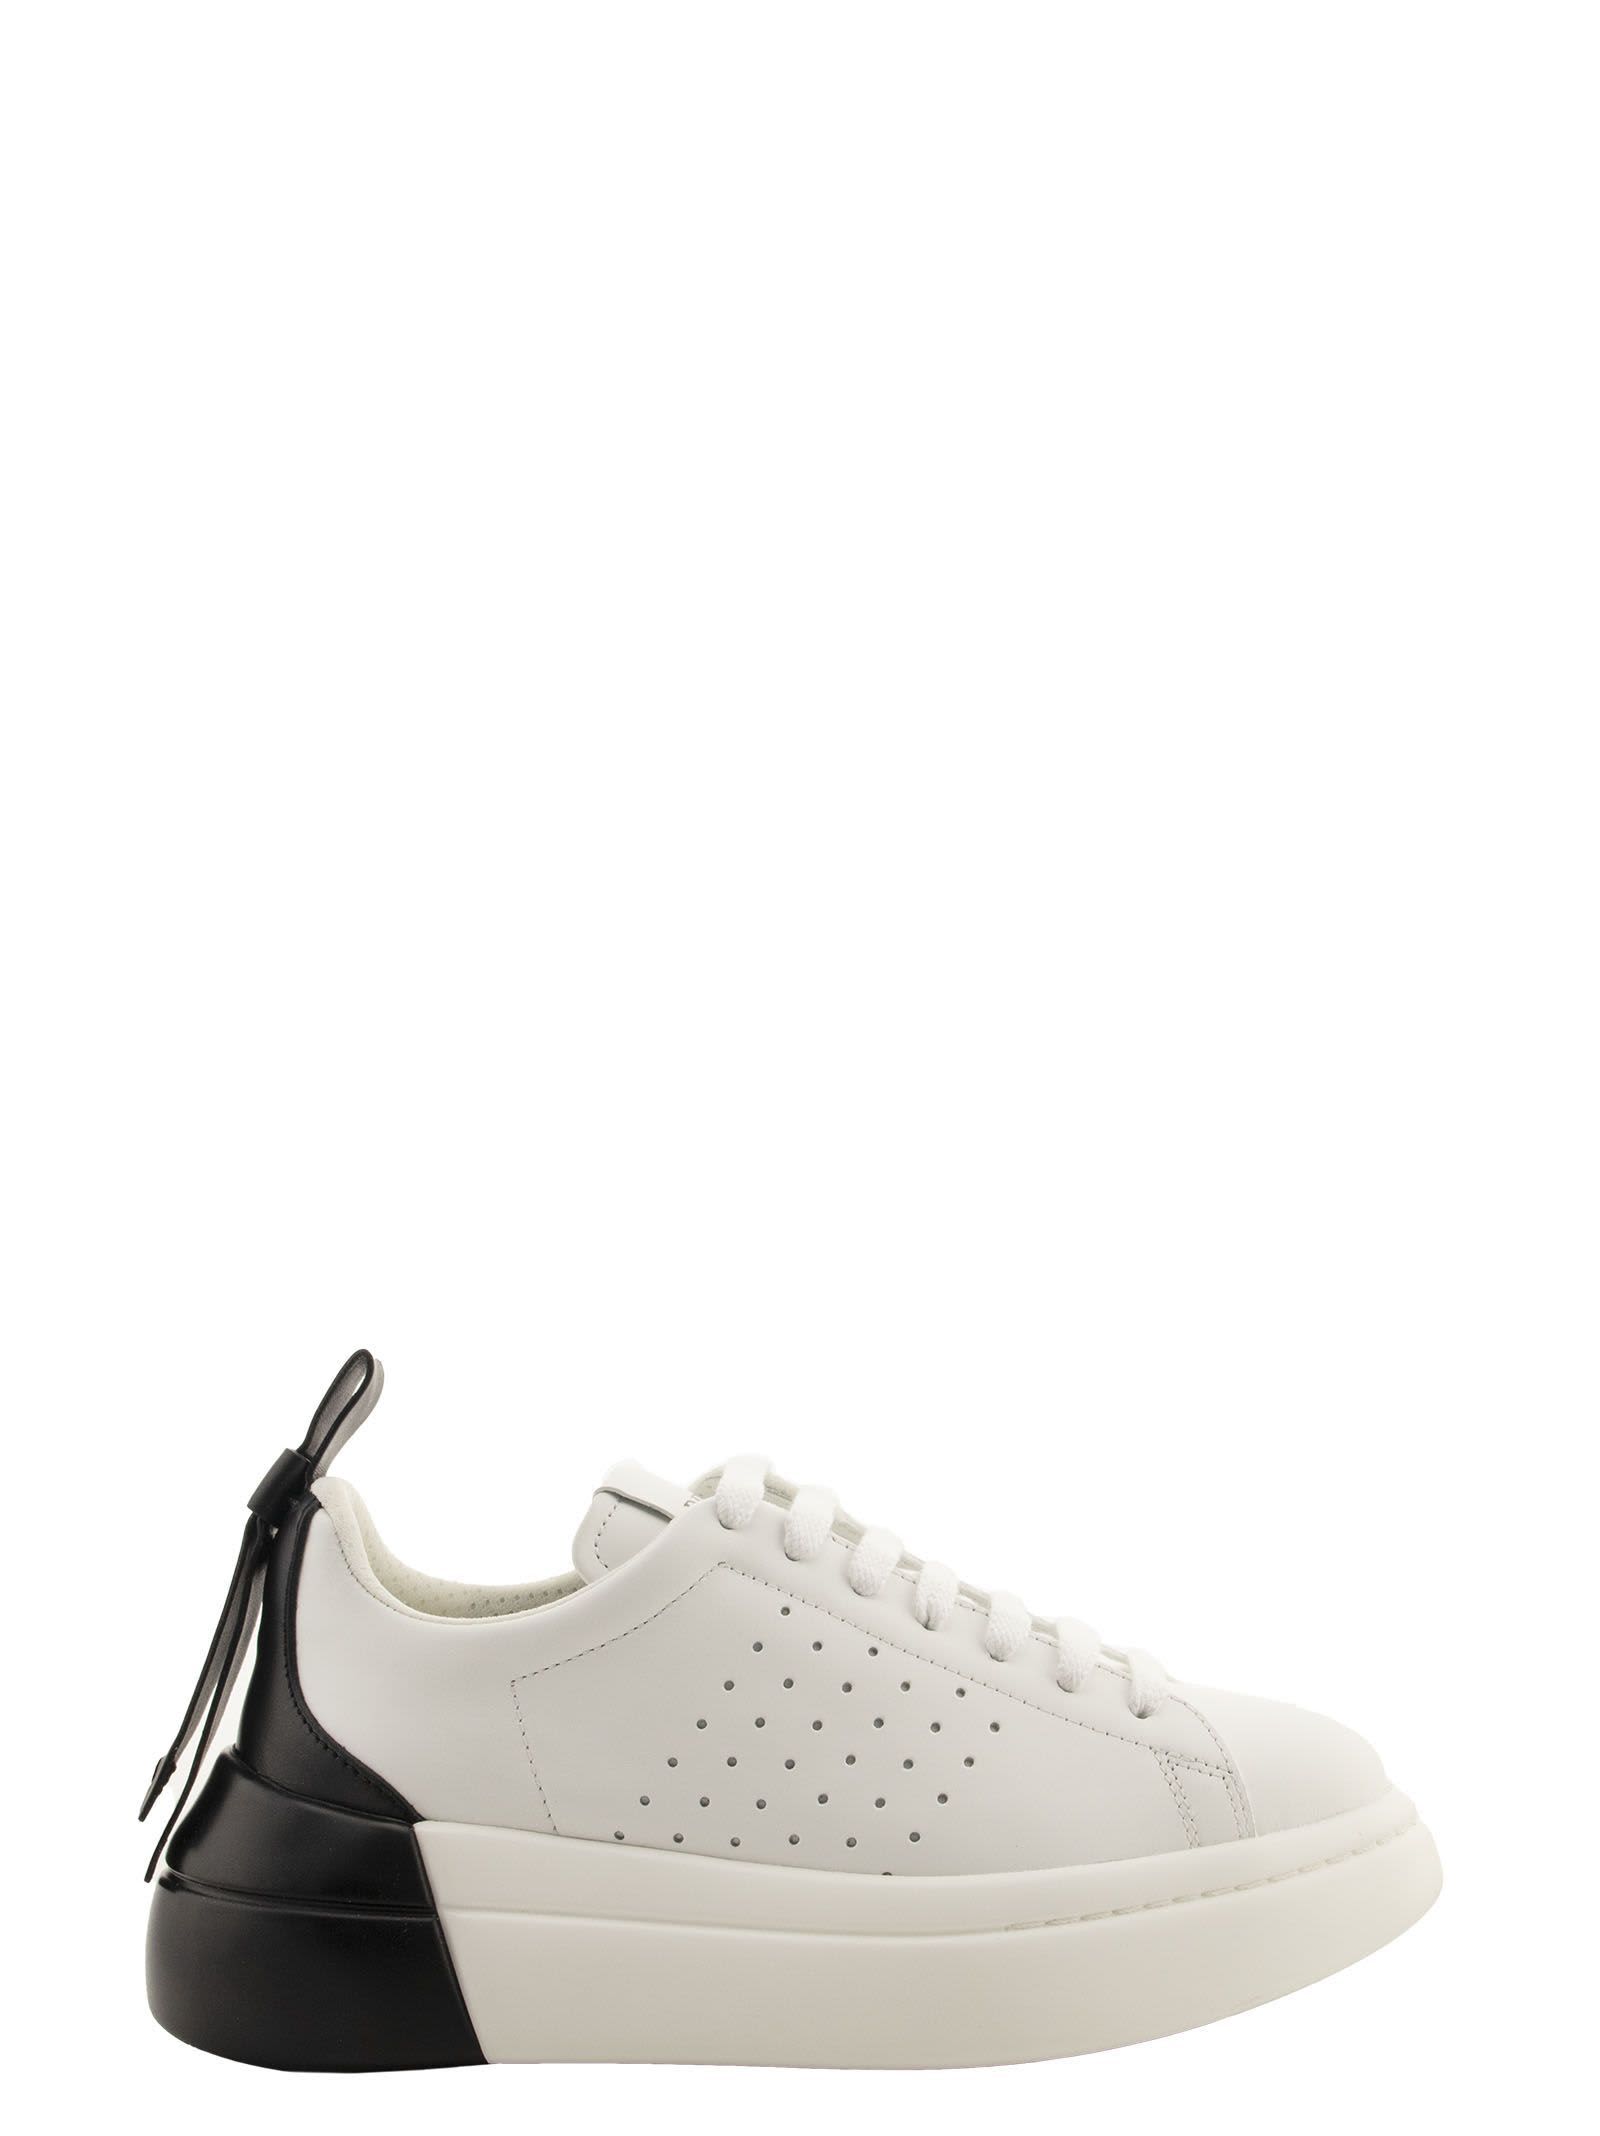 Buy RED Valentino Bowalk Sneaker online, shop RED Valentino shoes with free shipping